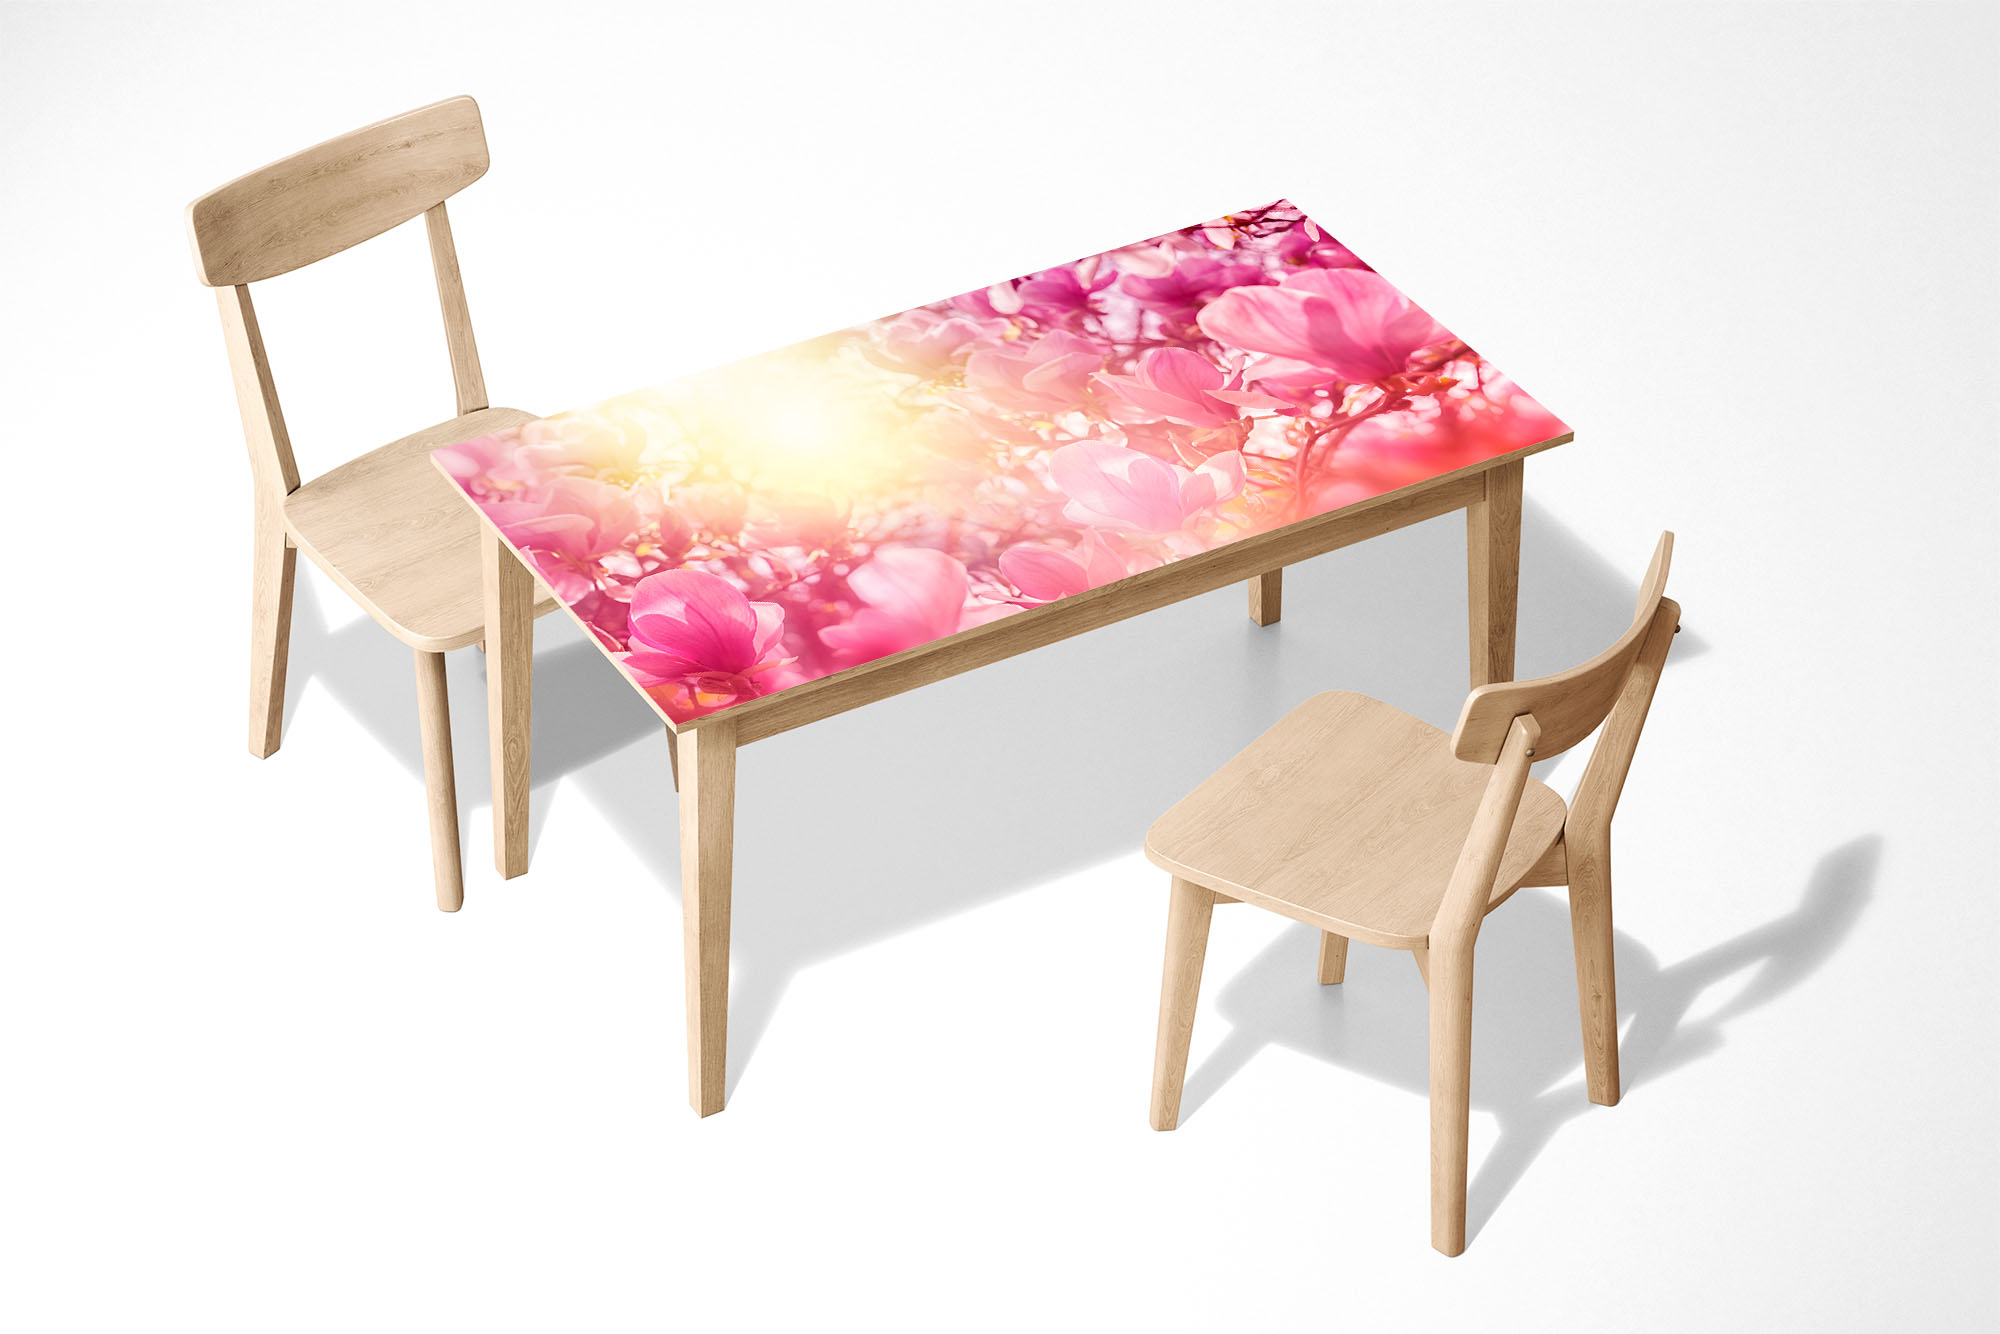 Pink Flowers Background Laminated Self Adhesive Vinyl Table Desk Art Décor Cover